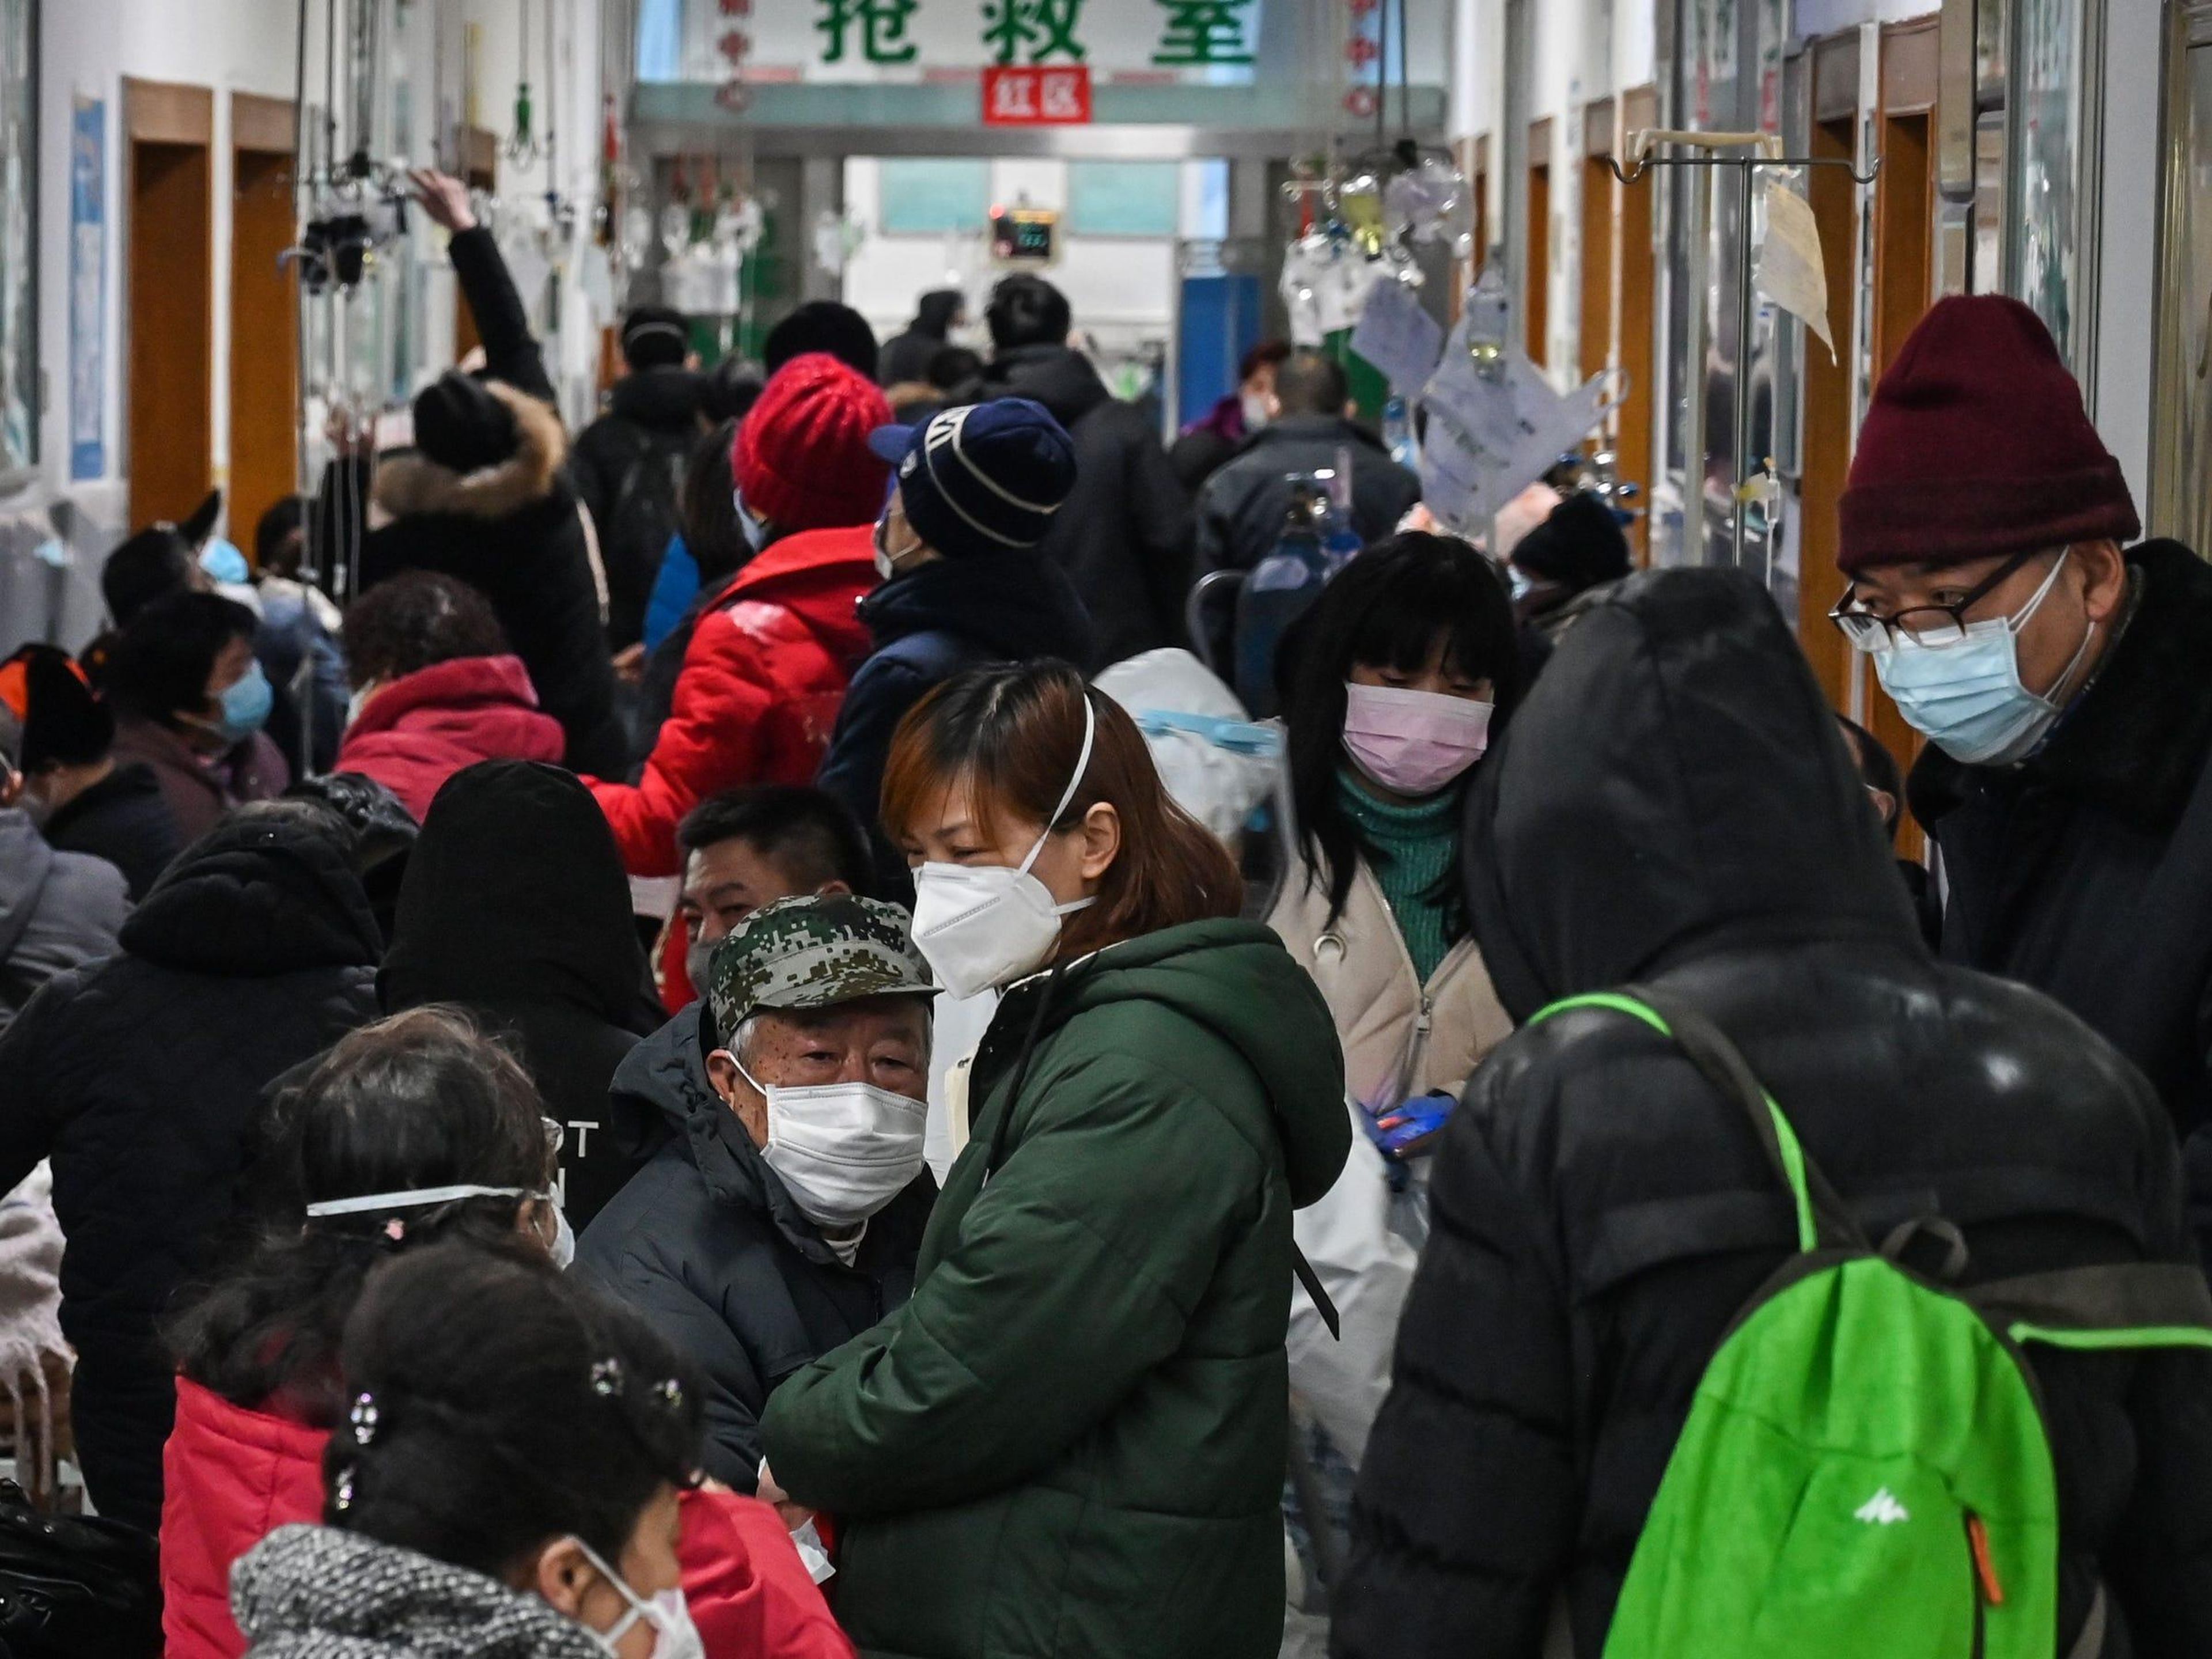 People wait for medical attention at Wuhan Red Cross Hospital on January 25, 2020.